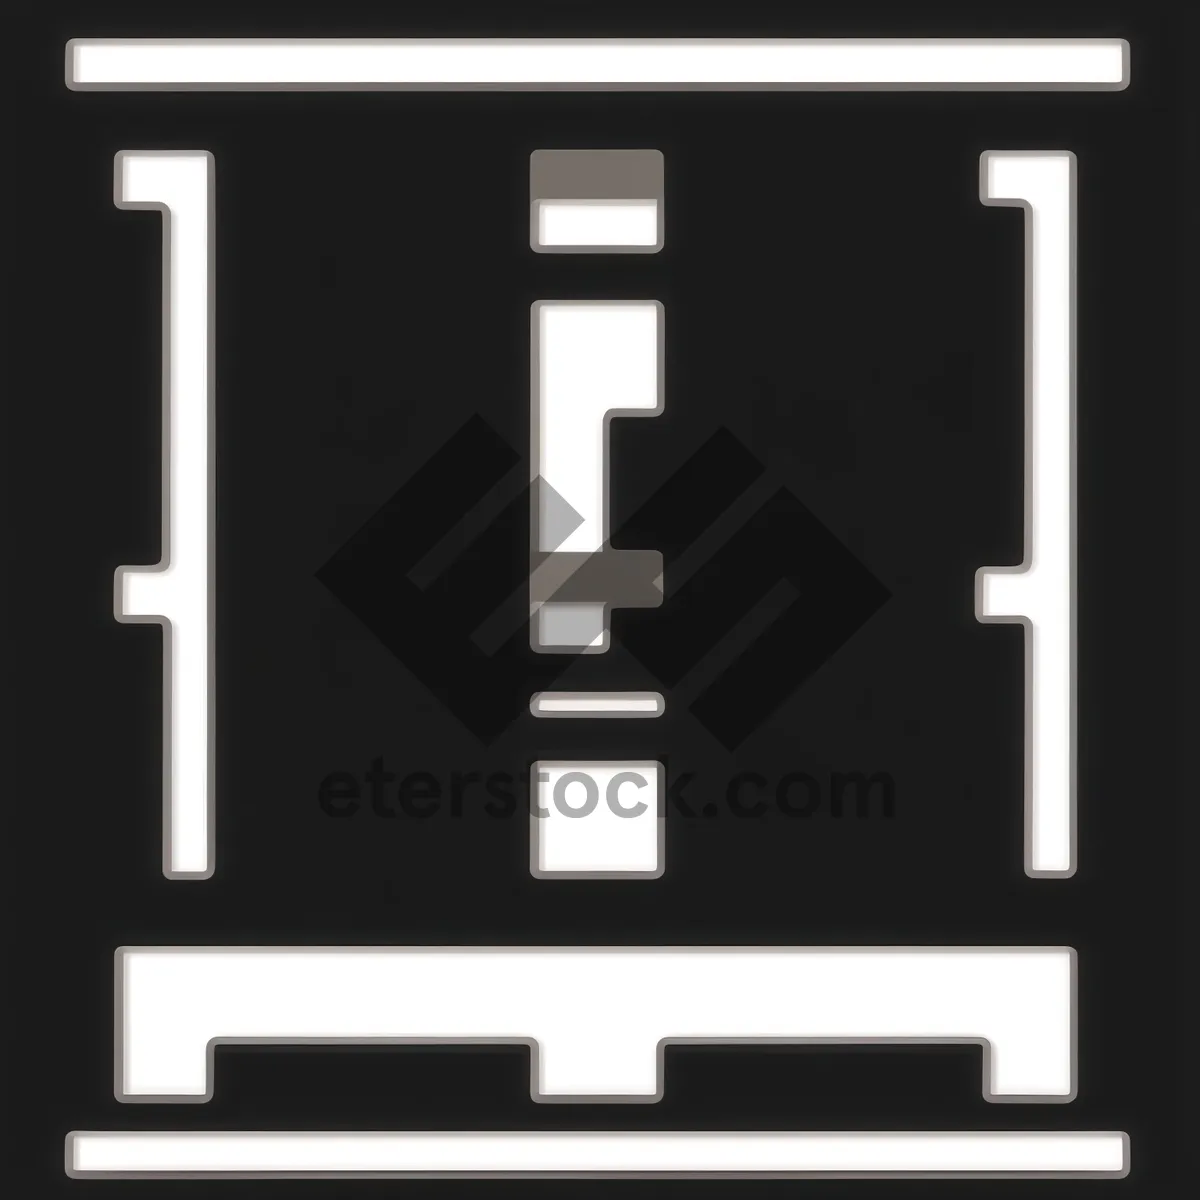 Picture of Web symbol and button icon set: Black, glossy, and shiny square buttons